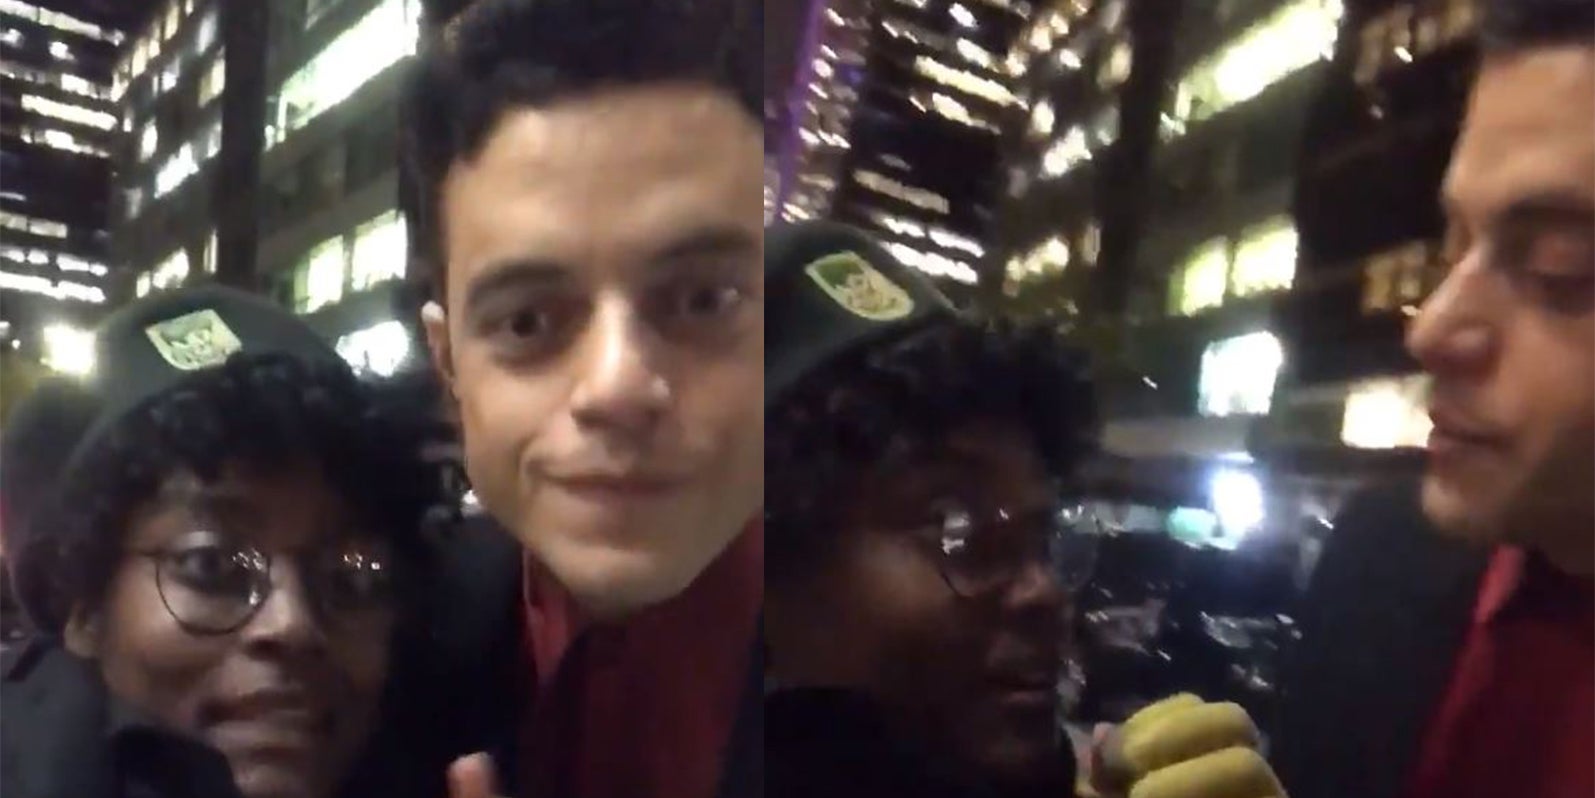 Rami Malek tried to film a video with a fan - he instantly became a meme | indy100